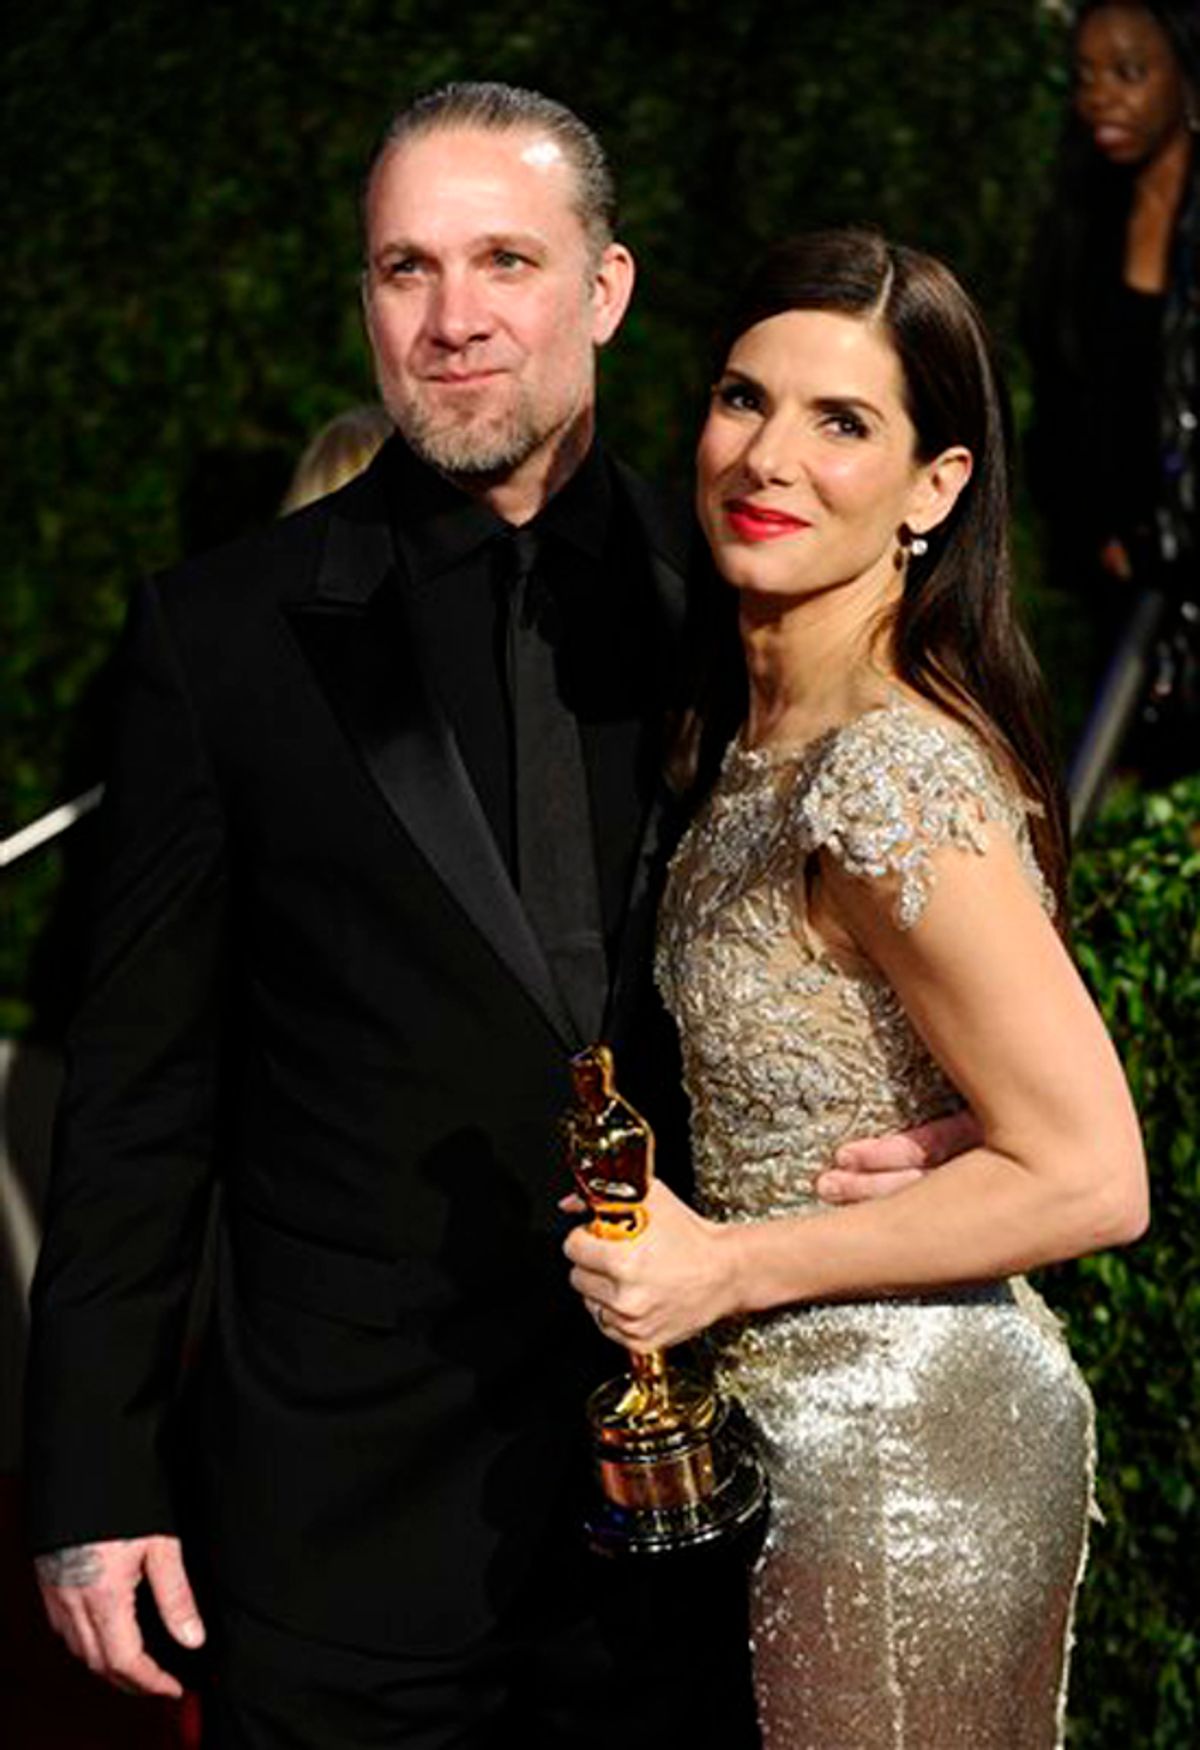 FILE - Sandra Bullock and Jesse James arrive at the Vanity Fair Oscar party on in this March 7, 2010 file photo taken in West Hollywood, Calif. Sandra Bullock has canceled her appearance at the London premiere of "The Blind Side" scheduled for Tuesday March 23, 2010 almost two weeks after winning a Best Actress Academy Award. In a statement released by Warner Bros UK., the 45-year-old actress says she can't attend the event for "unforeseen personal reasons." (AP Photo/Peter Kramer, File)  (Peter Kramer)